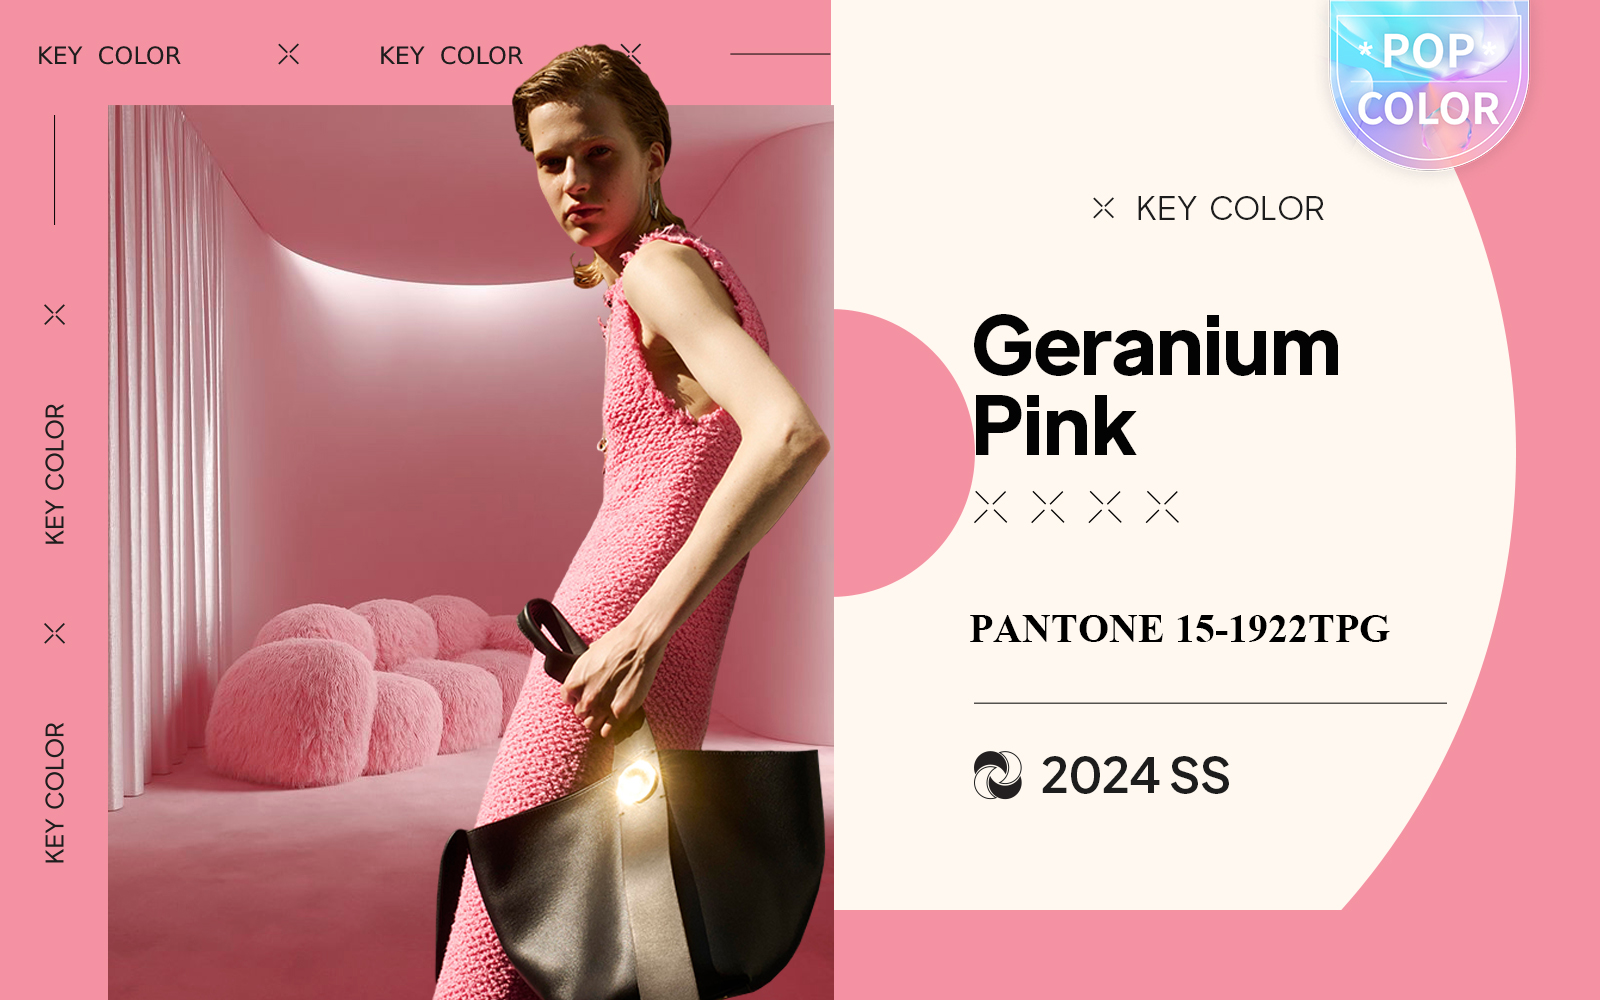 Geranium Pink -- The Color Trend for Womenswear